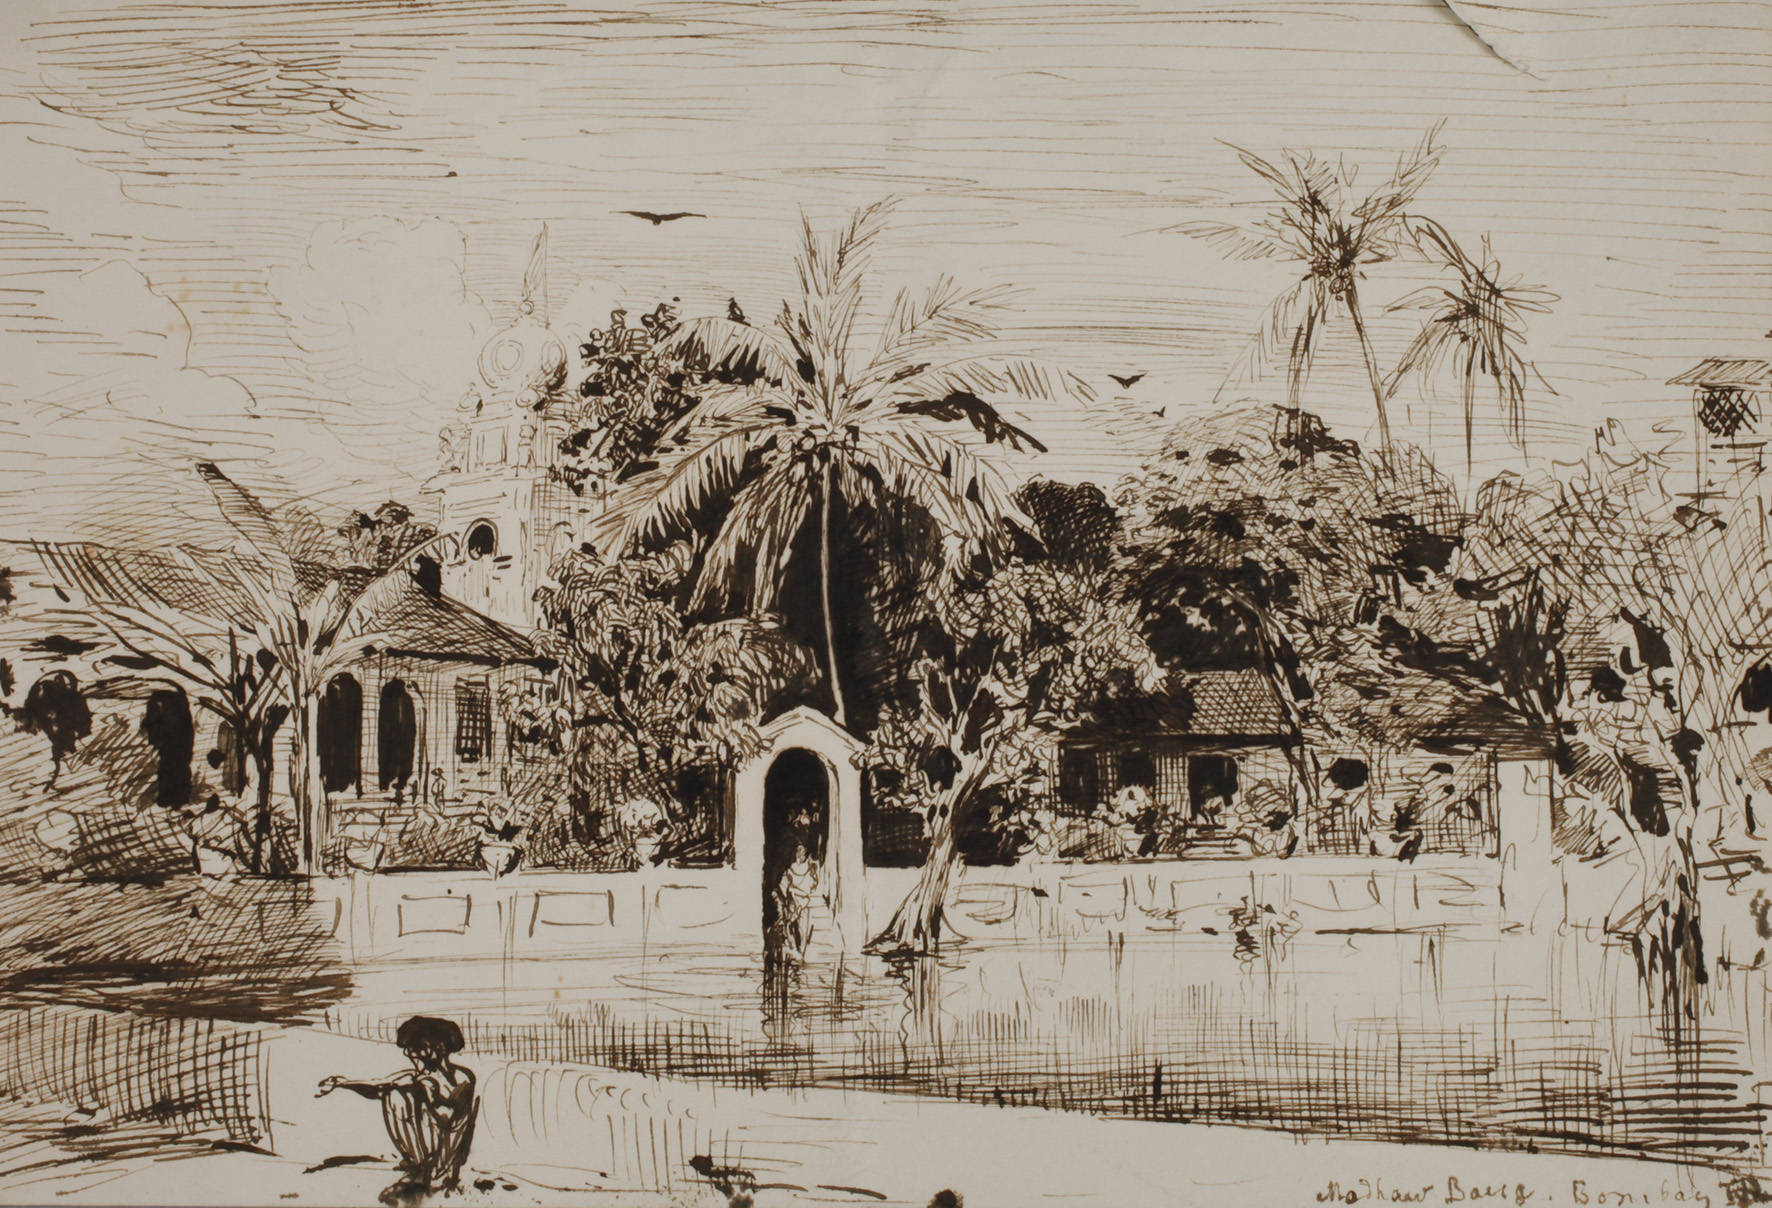 ”Madhaw Baug in Bombay”